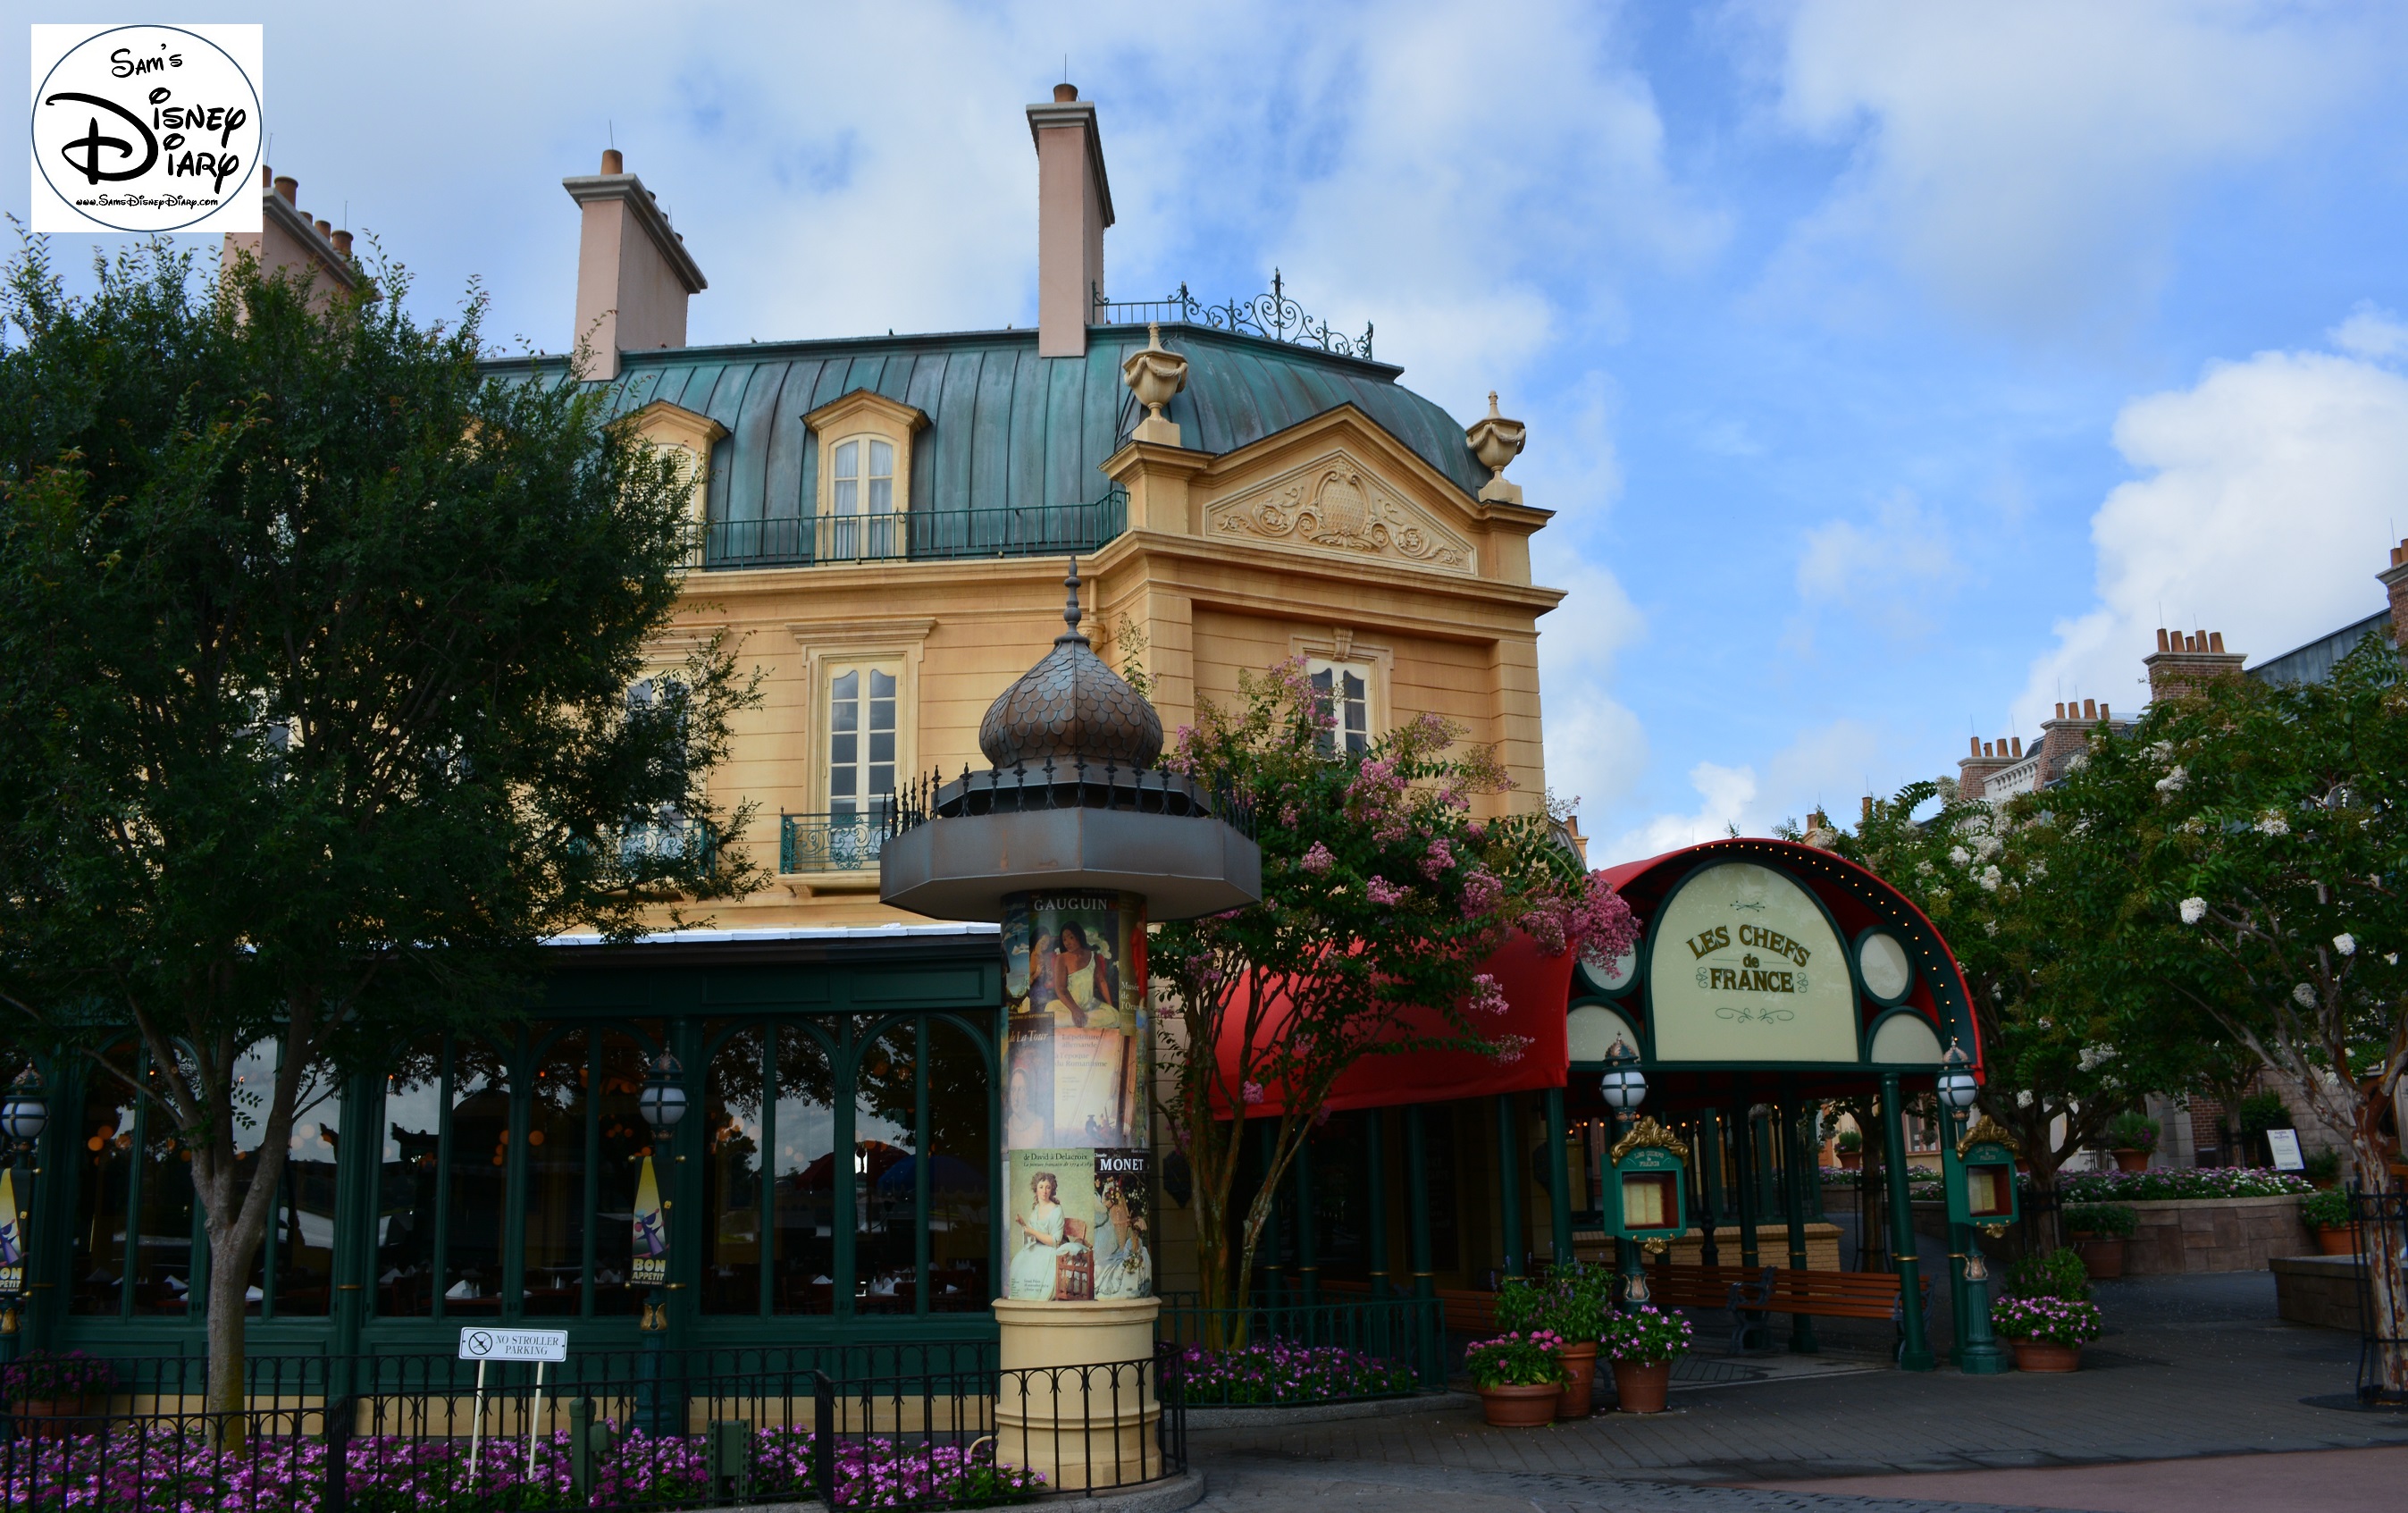 Opening at 9am, Less Halles Boulanderie & Patisserie offers a unique opportunity to visit France before World Showcase Opens at 11am